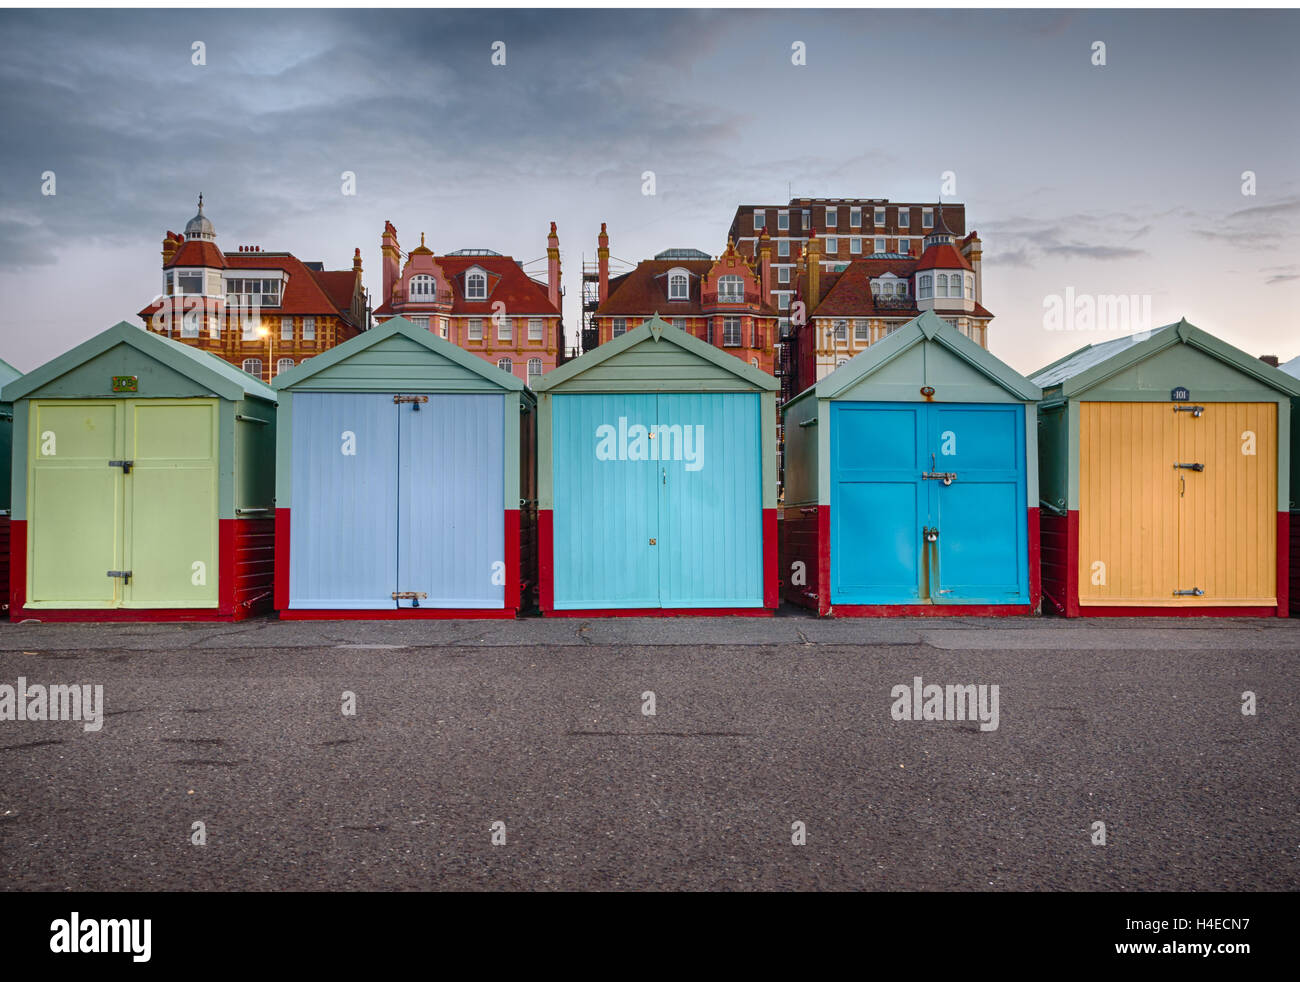 Colourful beach huts on the promenade at Hove Gardens, East Sussex